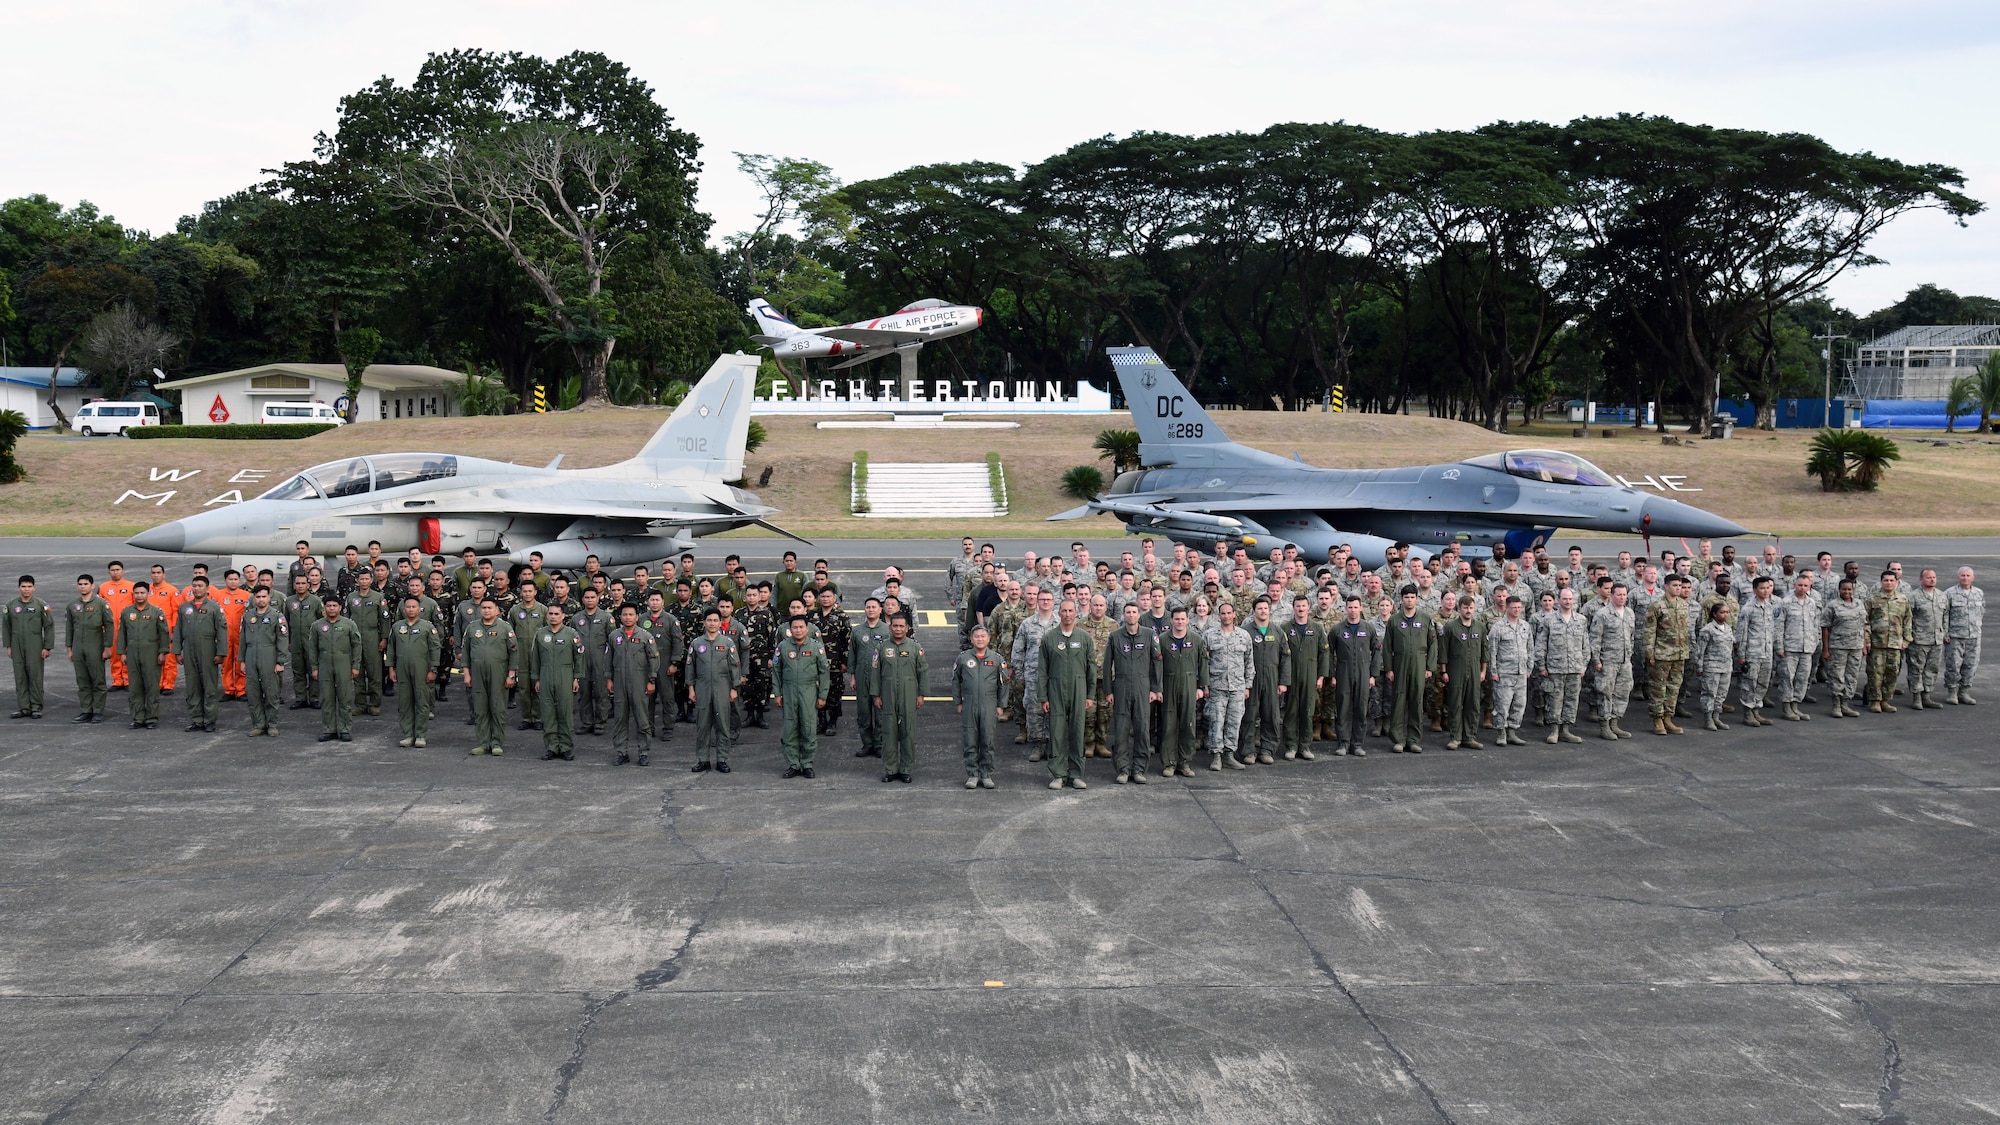 U.S. Air Force members pose alongside Philippine Air Force members during the Bilateral Air Contingent Exchange-Philippines (BACE-P) at Cesar Basa Air Base, Philippines, Feb. 1, 2019.